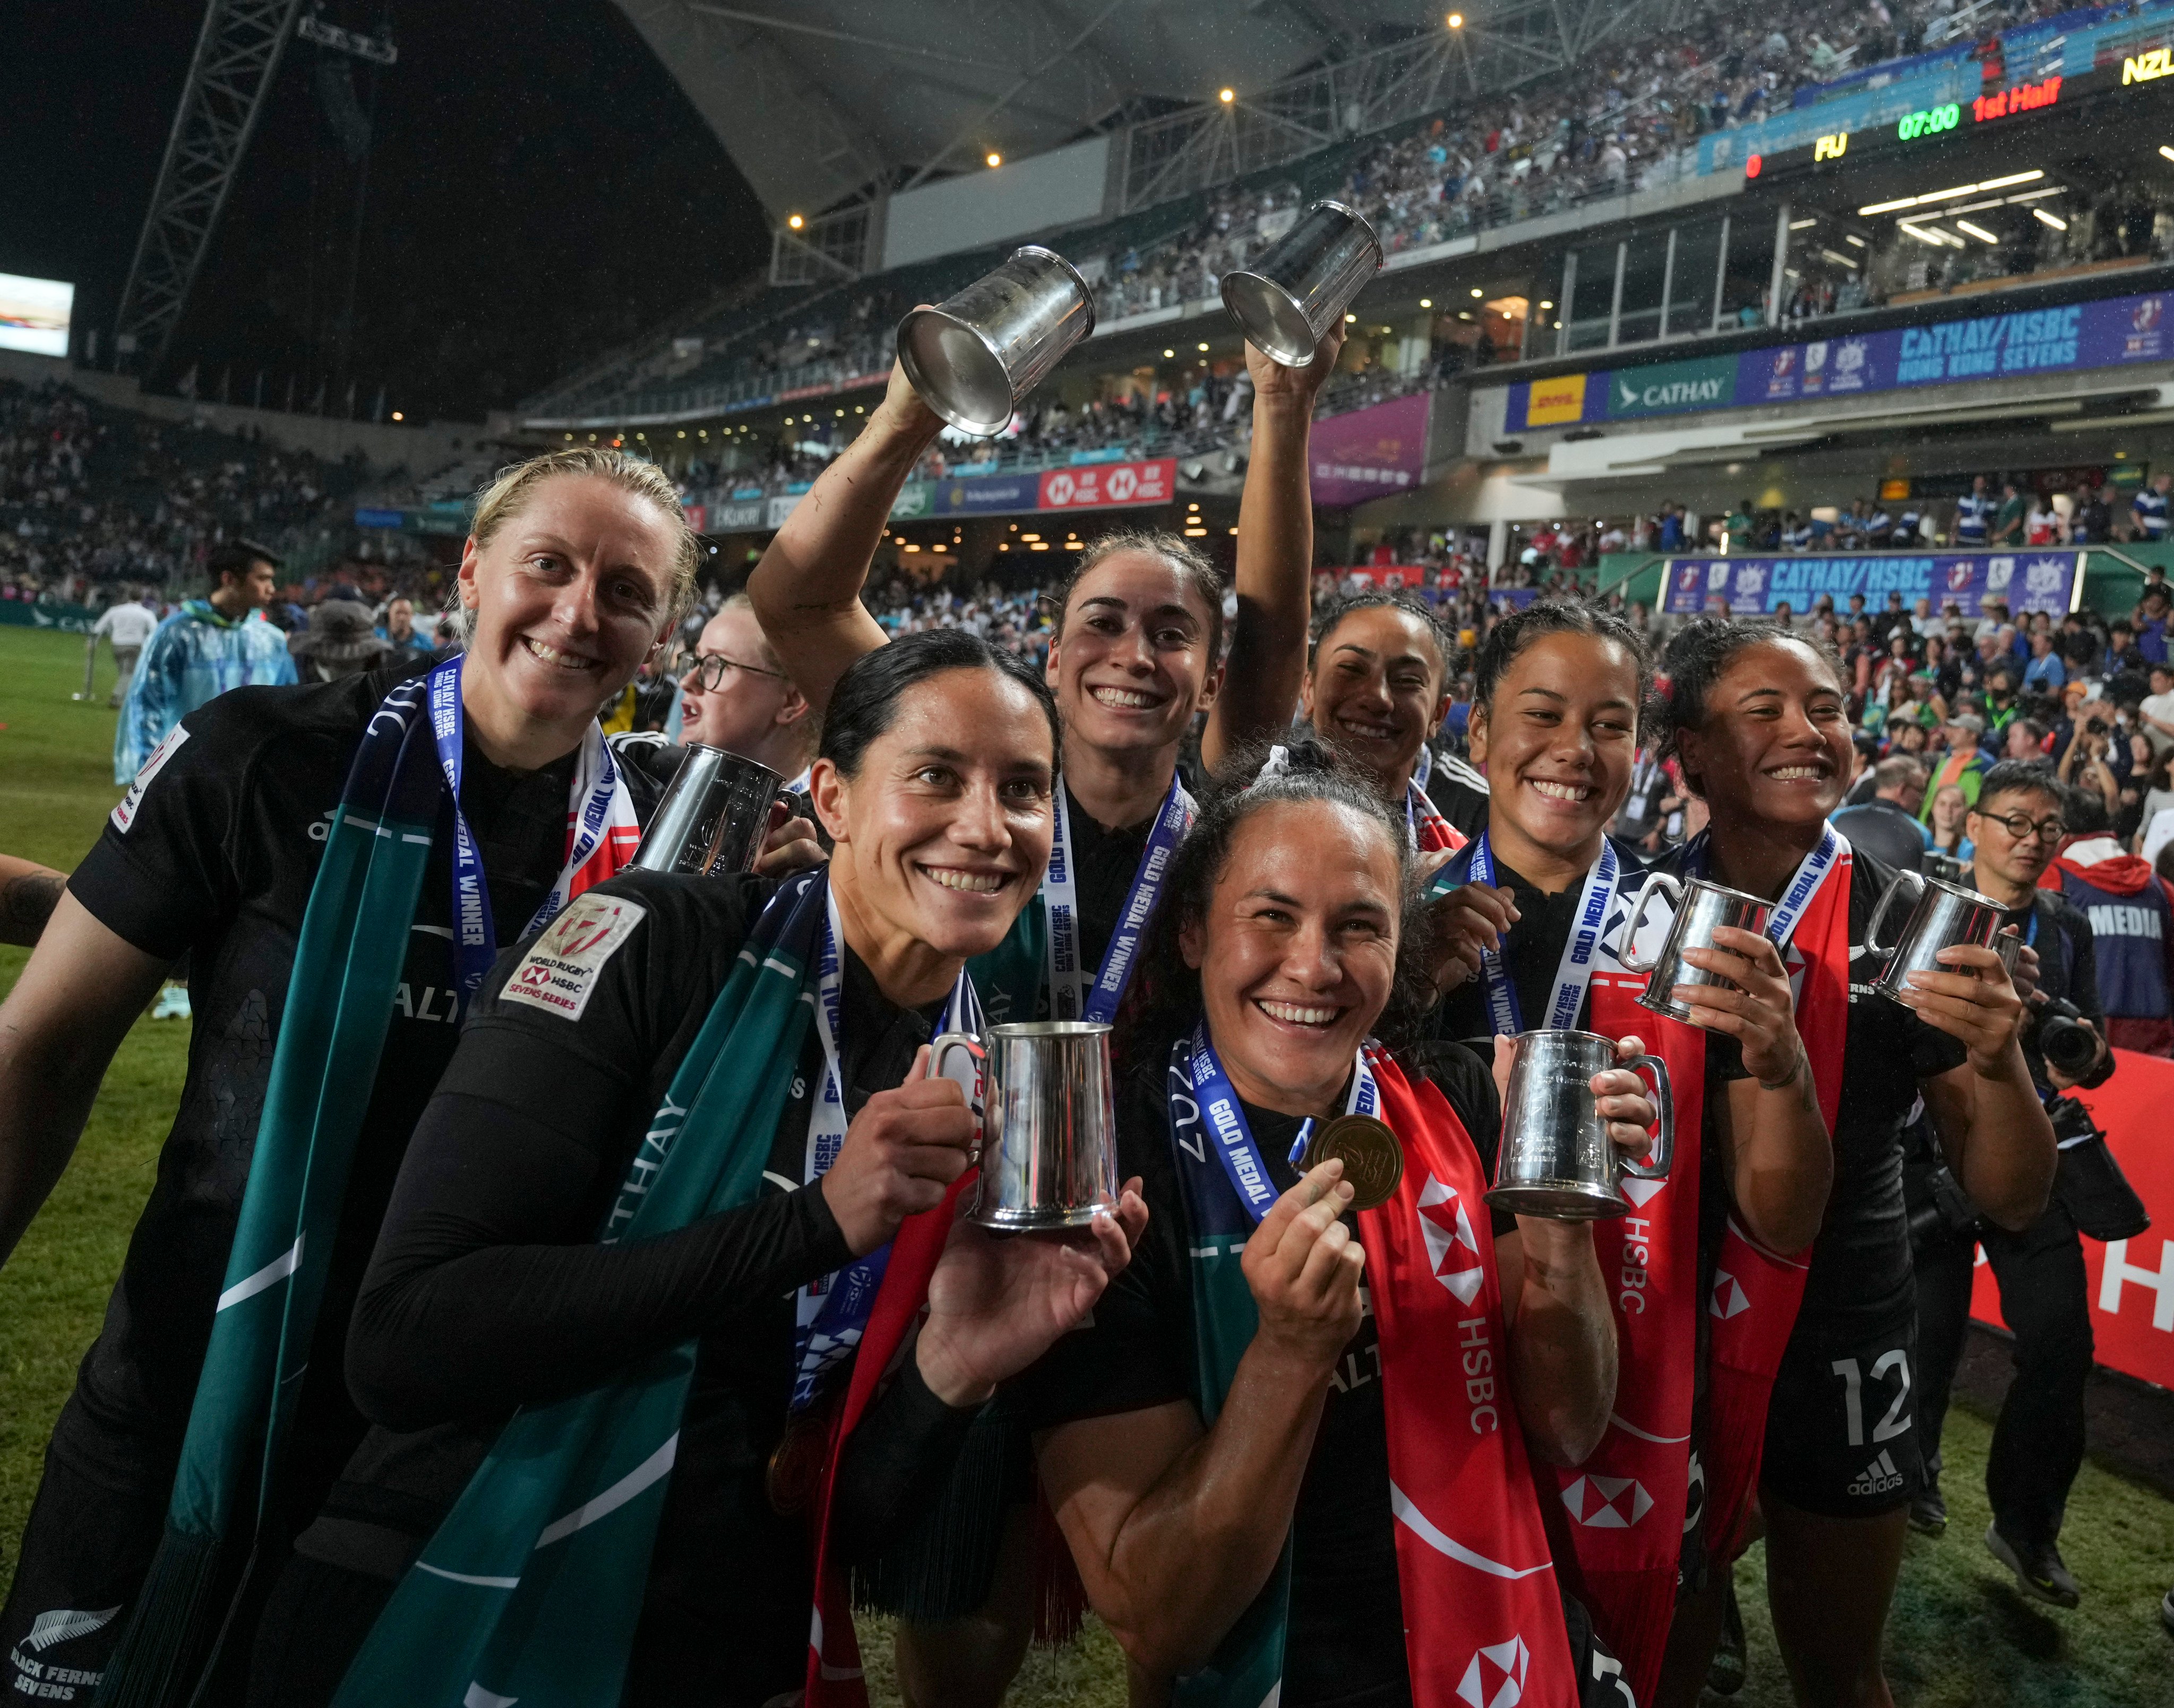 The New Zealand woman’s team celebrate victory over Australia in the Cup final. Photo: Sam Tsang